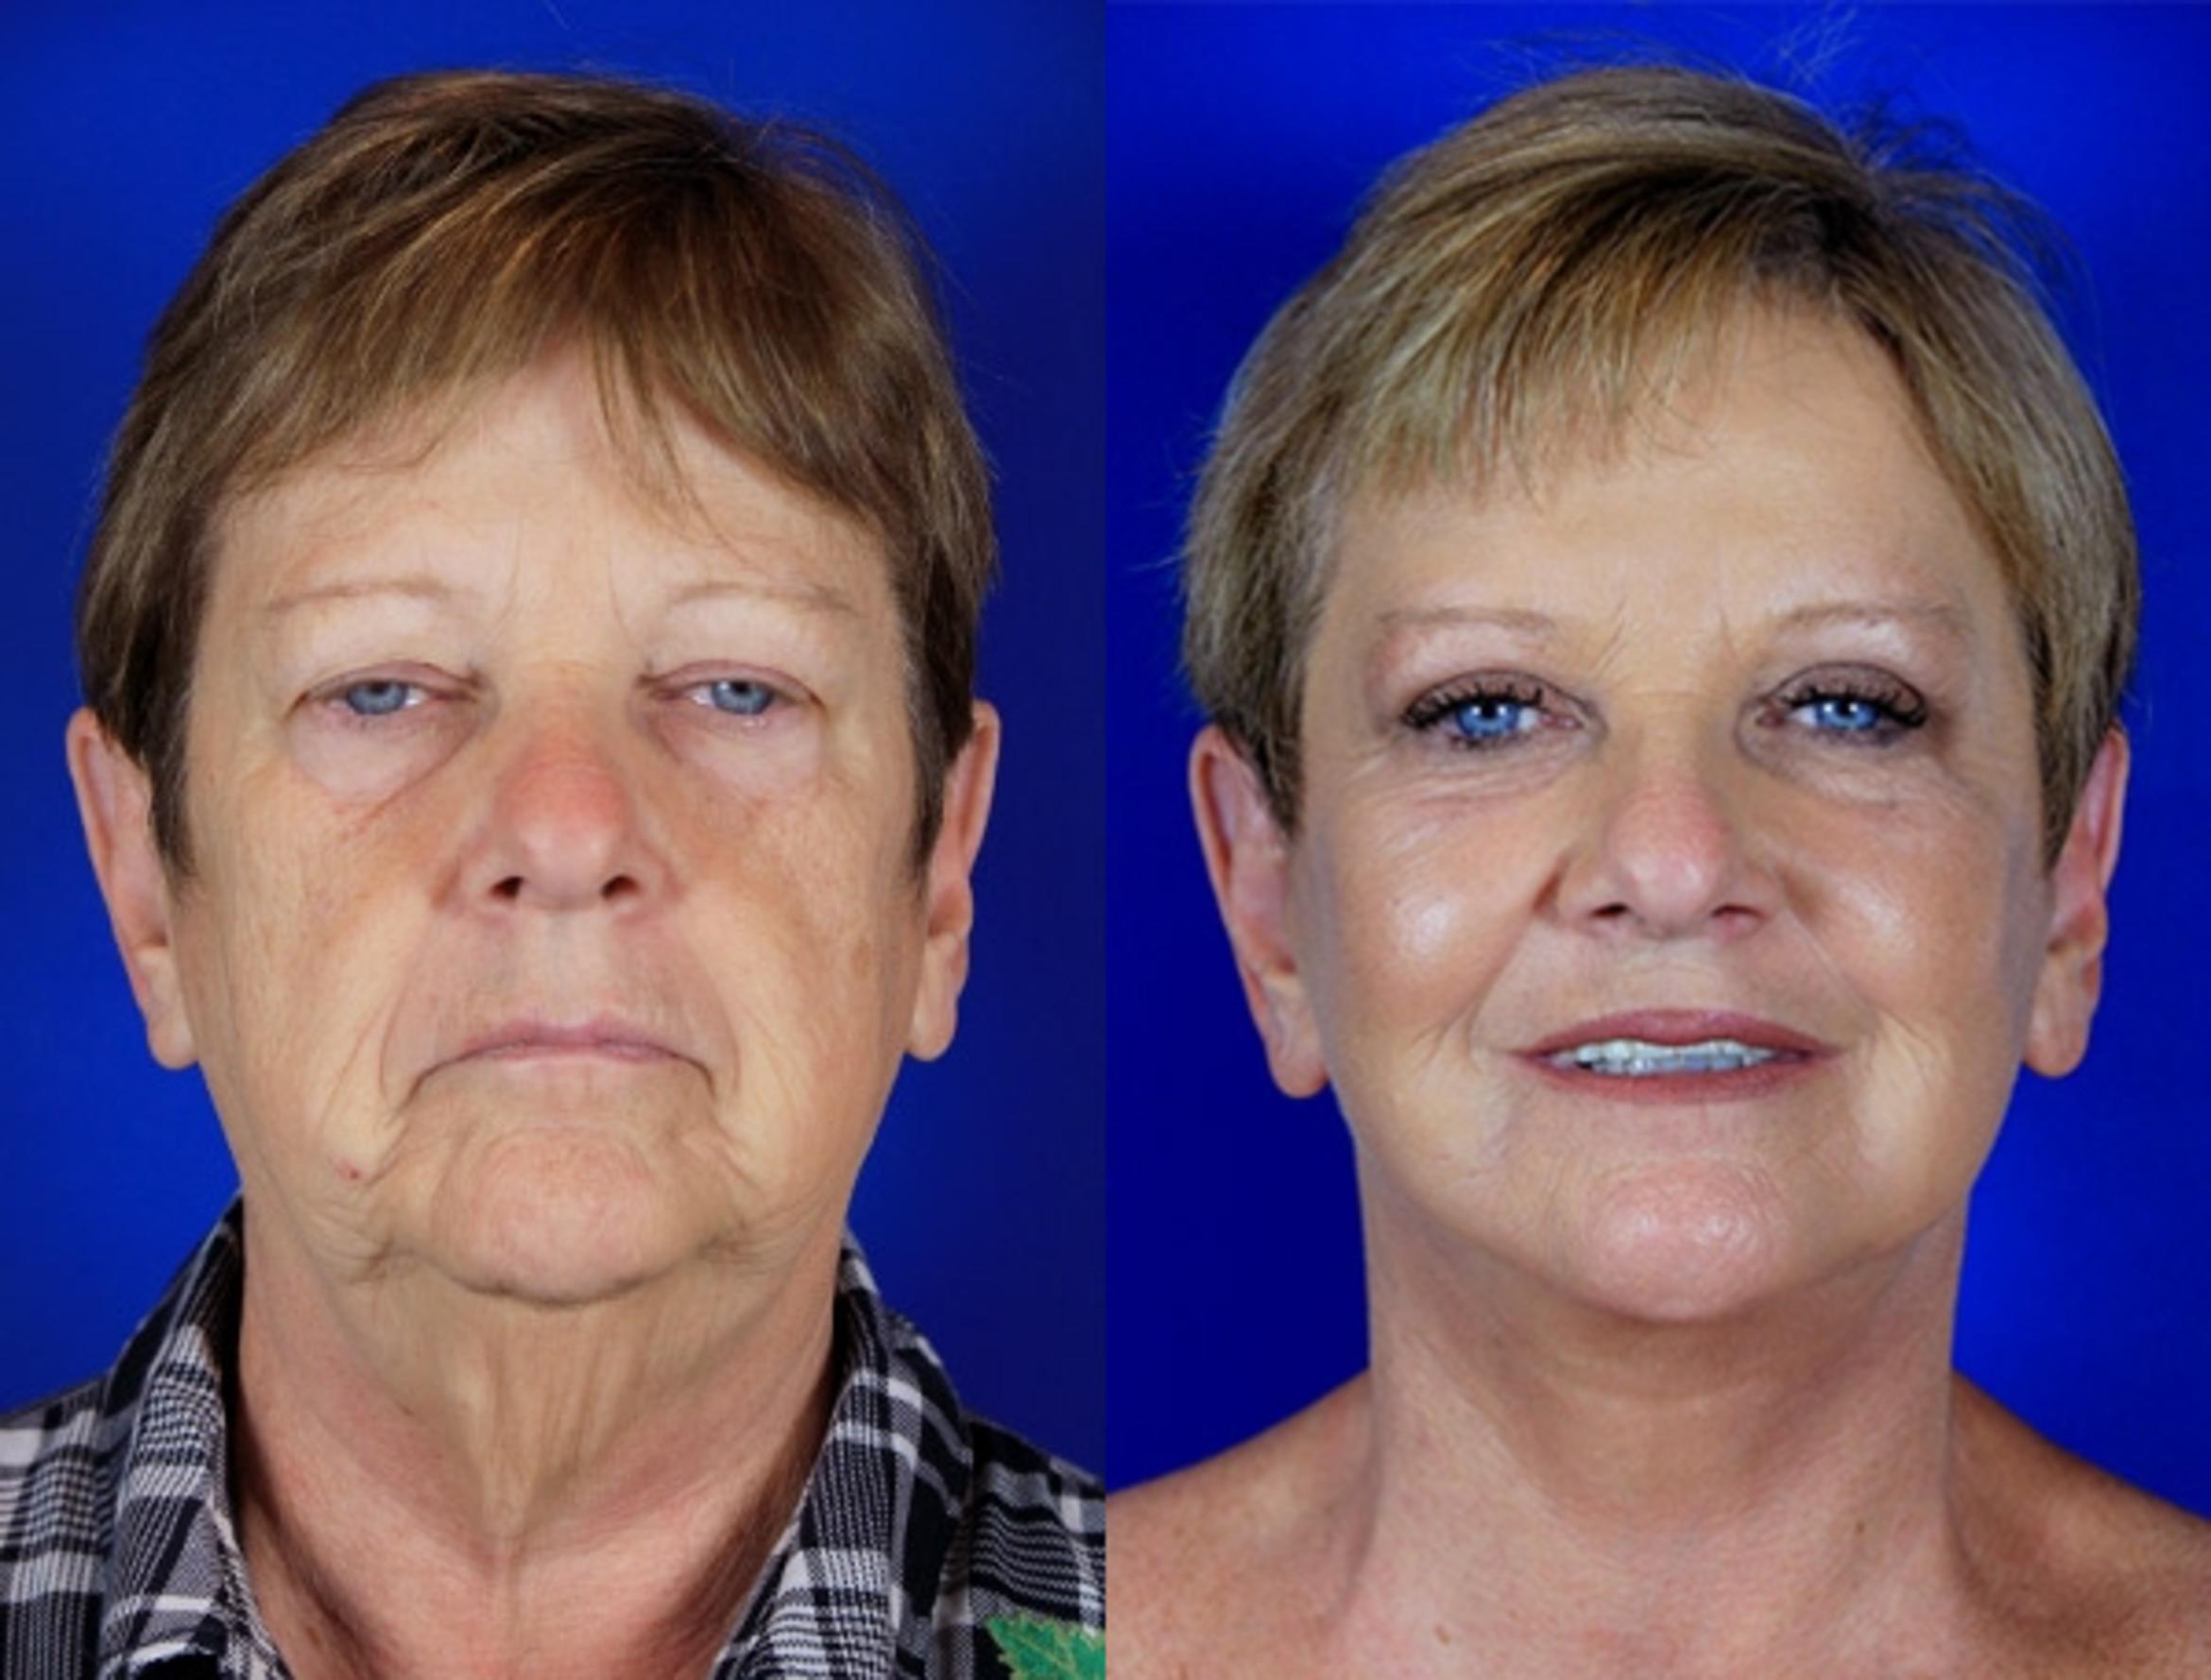 Woman before and after a brow lift, blepharoplasty, facelift, and laser skin resurfacing.